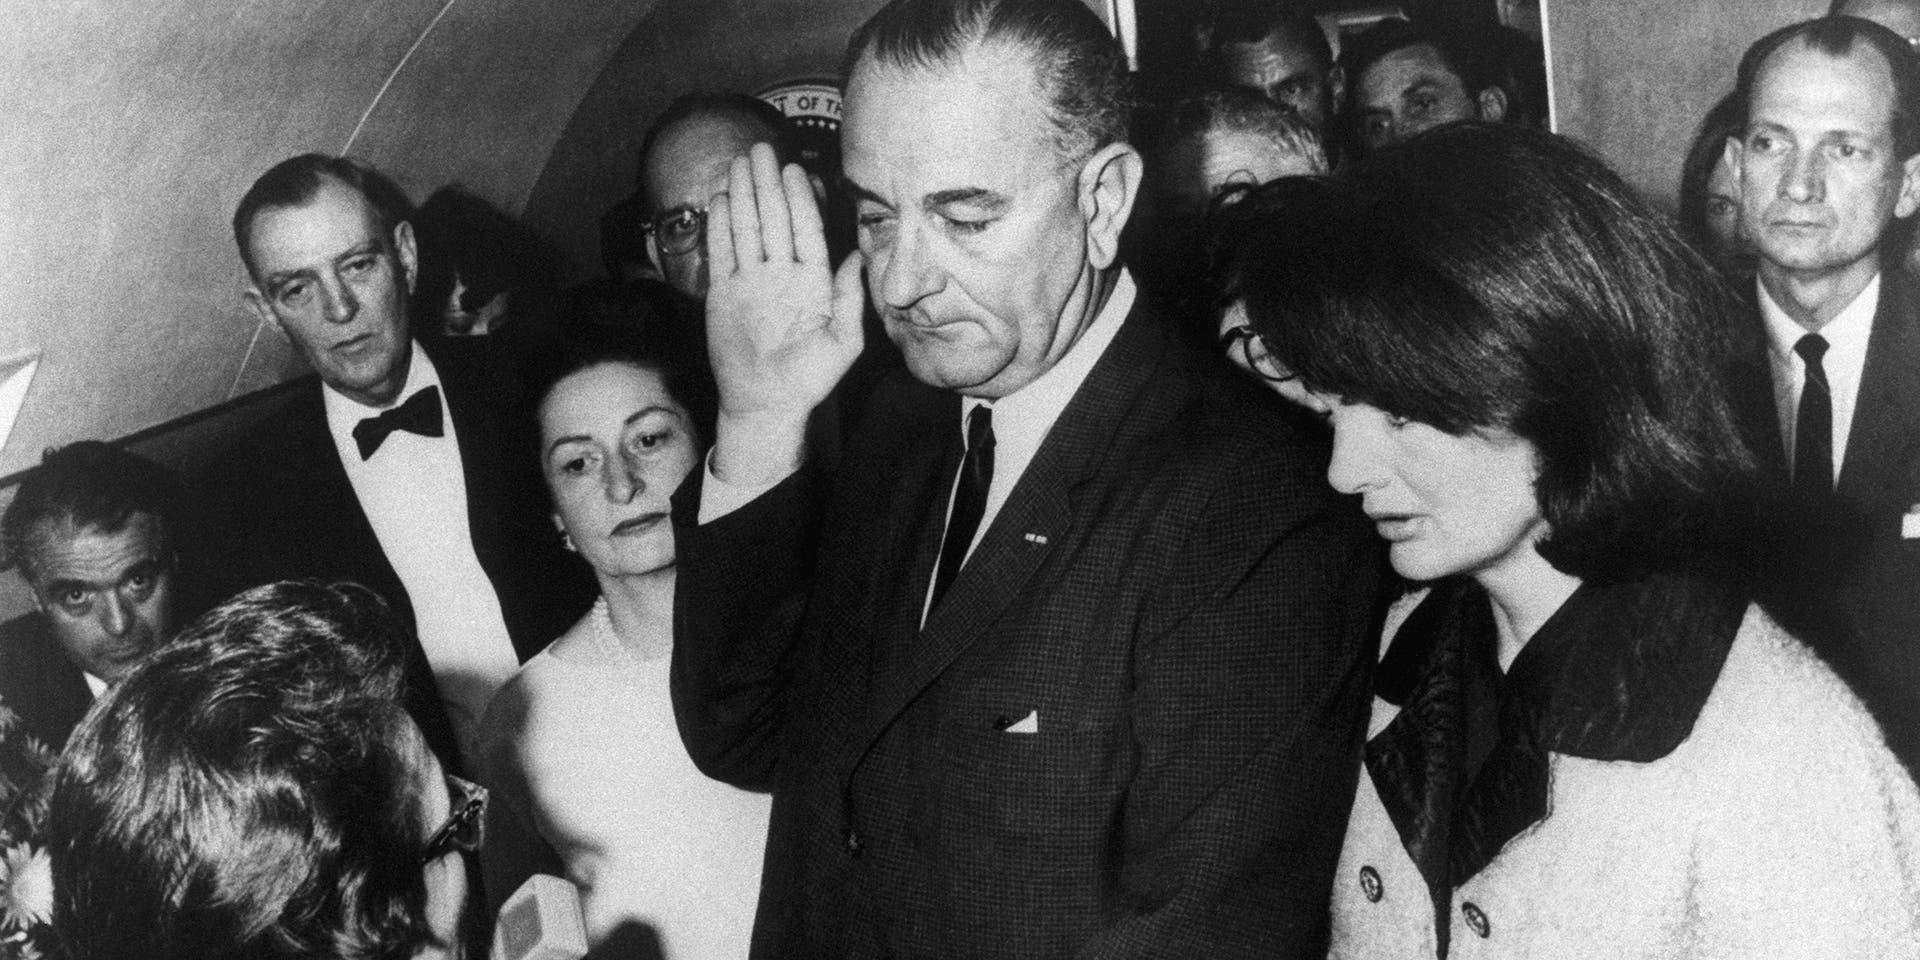 Vice President Lyndon B. Johnson is sworn in to the office of the Presidency aboard Air Force One in Dallas, Texas, hours after the assassination of President John F. Kennedy. Johnson is flanked by wife, Lady Bird Johnson (L), and First Lady Jacqueline Kennedy during the ceremony, which is being administered by U.S. District Judge Sarah Hughes. At farthest left in the background is Jack Valenti.